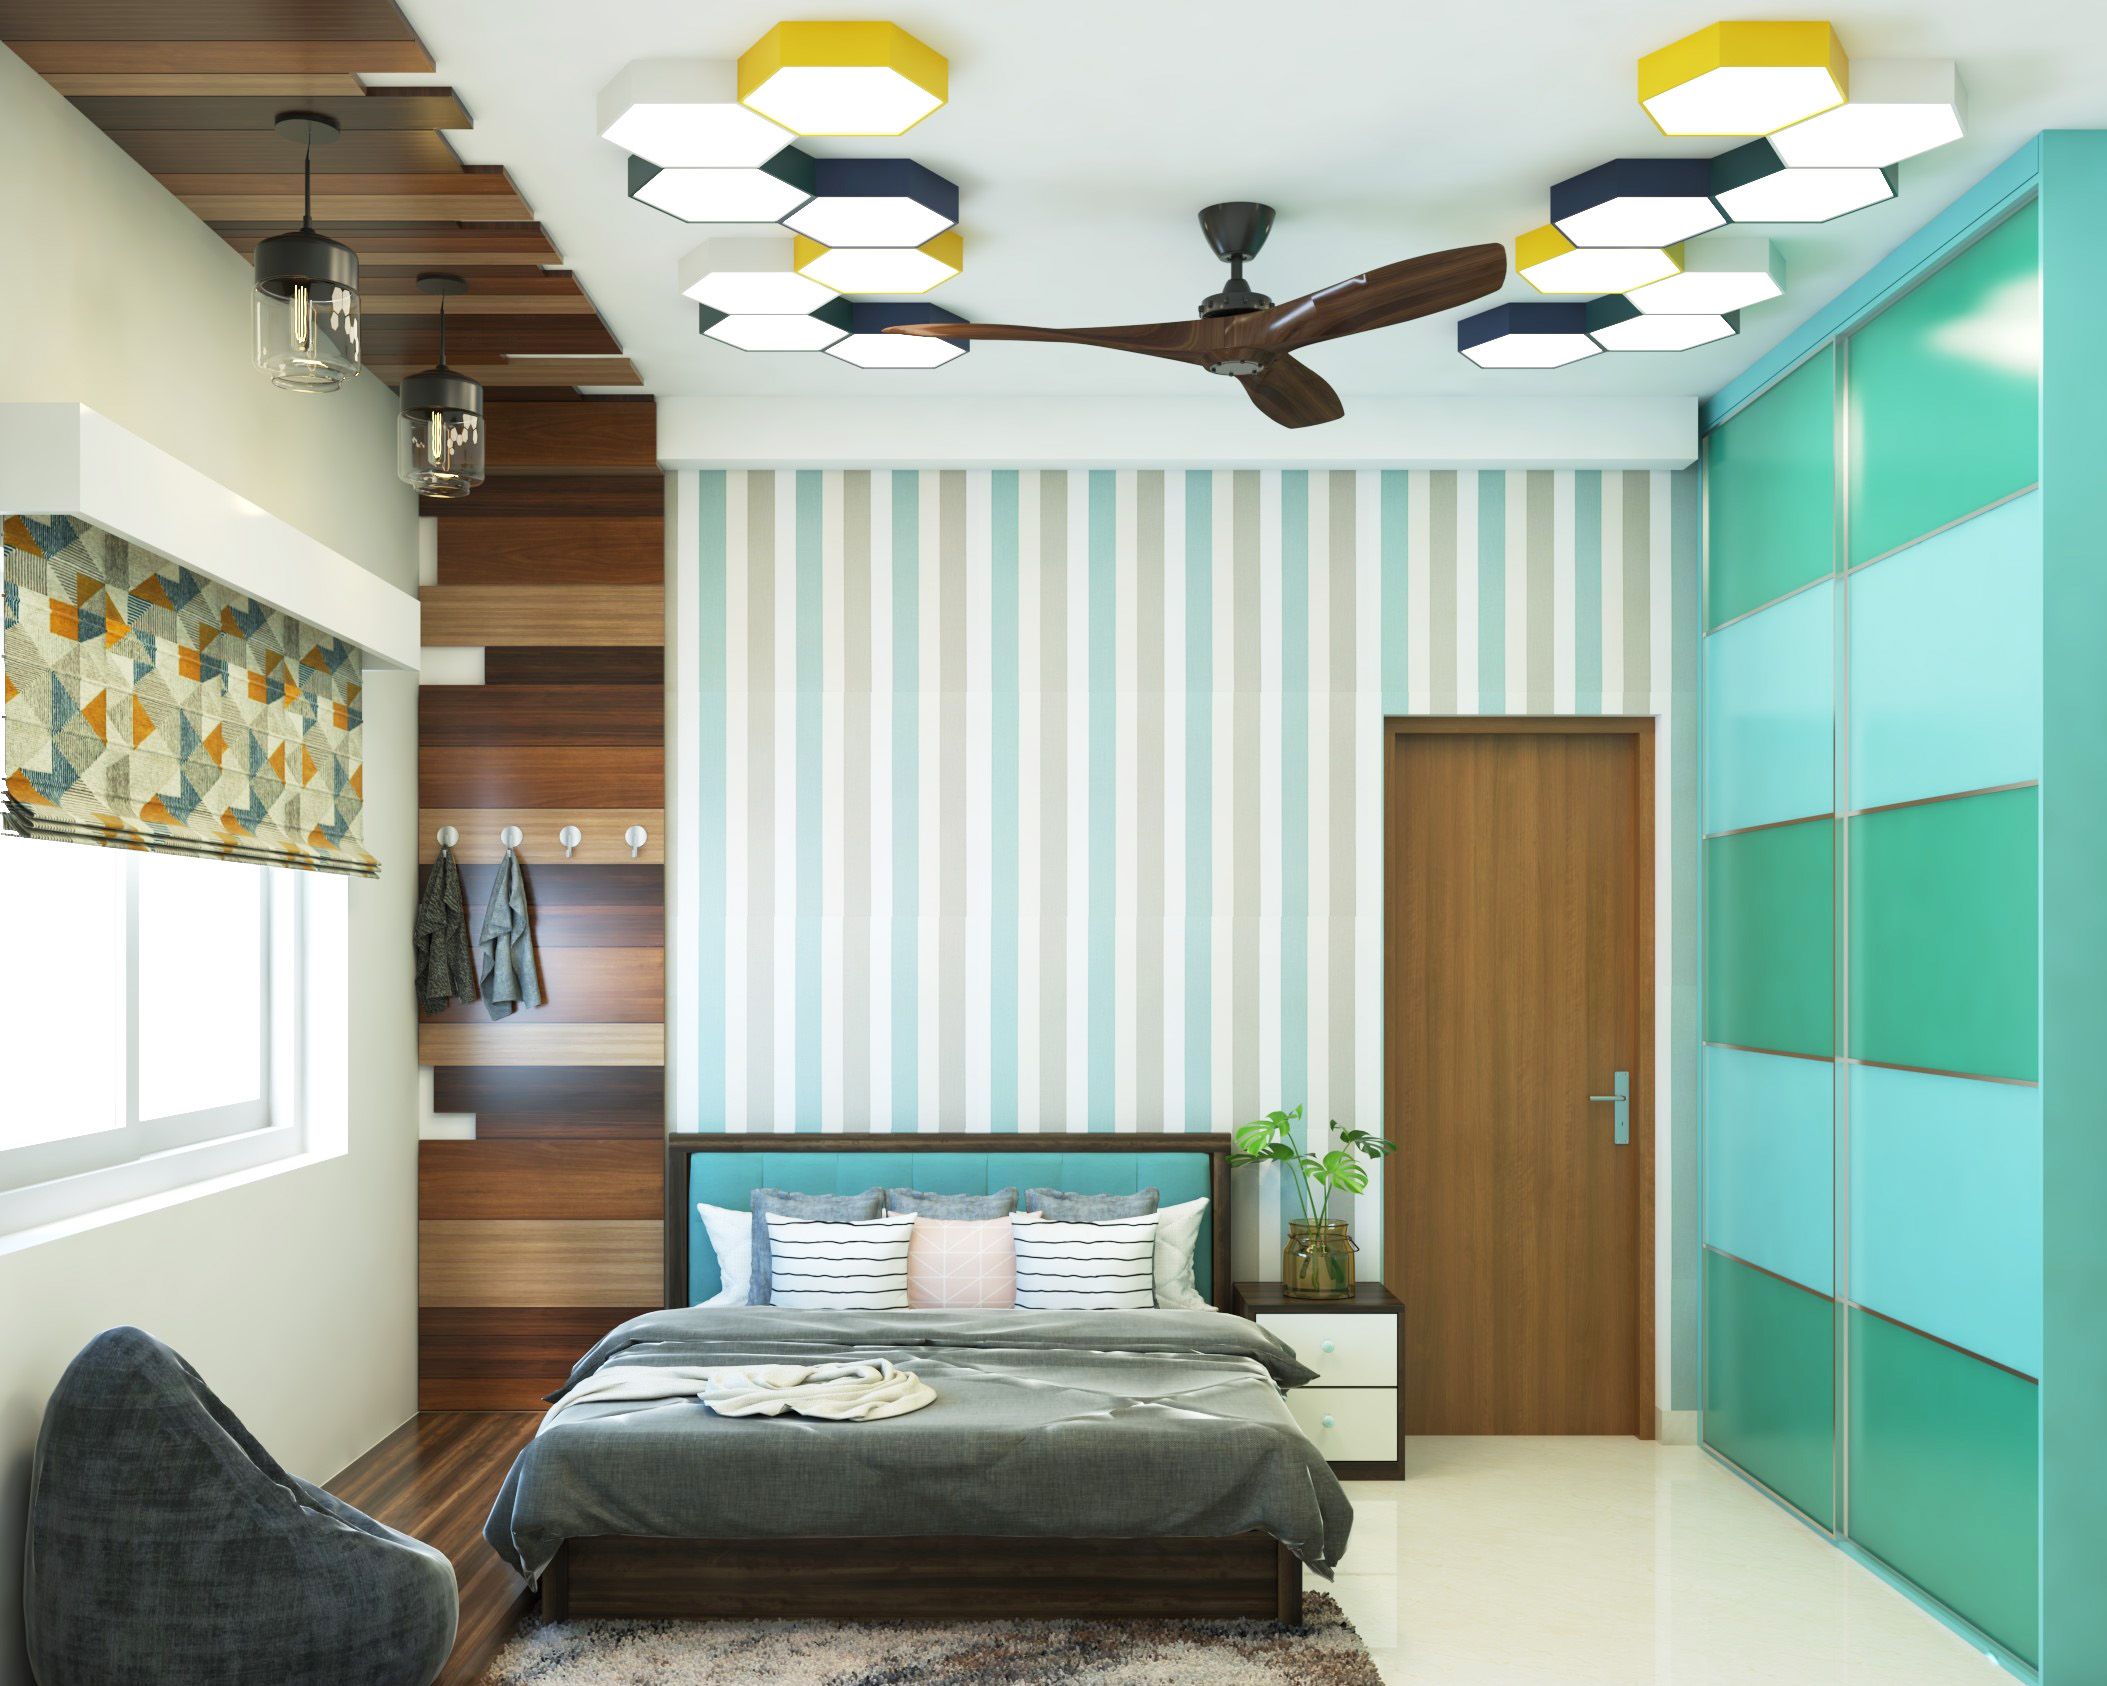 Modern POP And Wooden Ceiling Design With Recessed Lights